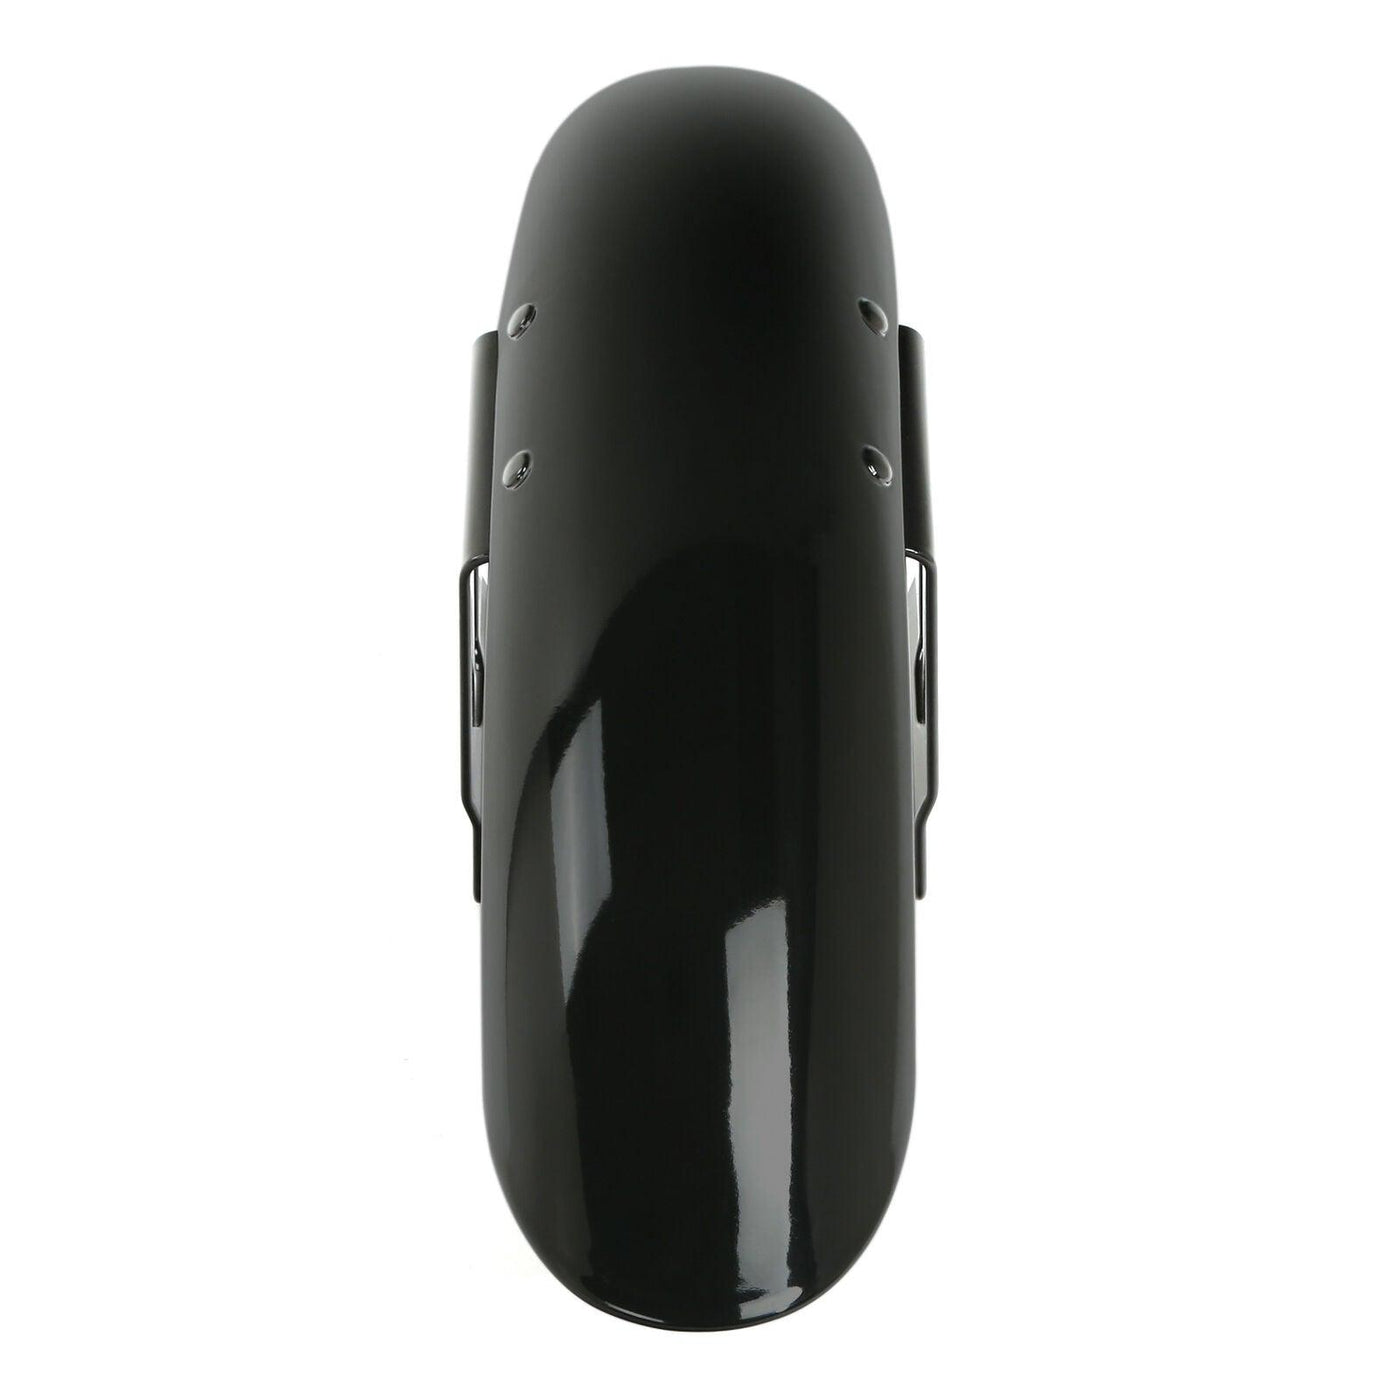 Gloss/ Matte Front Fender Mudguard Cover Fit For Harley Sportster XL 883 XL1200 - Moto Life Products